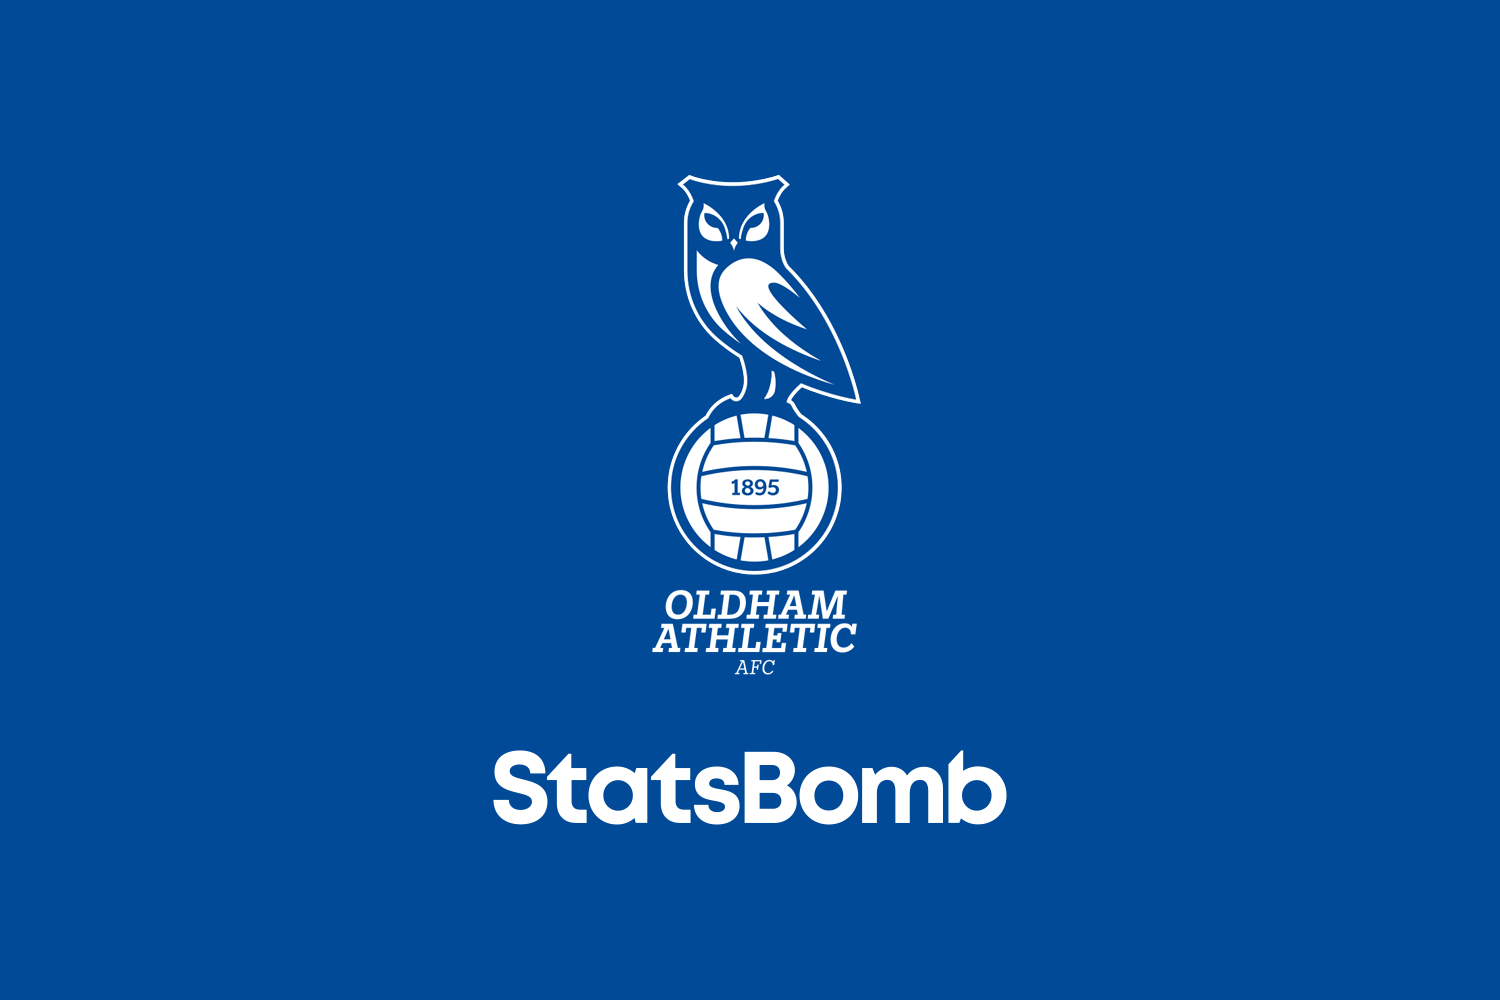 StatsBomb Begin Growth In The National League With Oldham Athletic FC Partnership